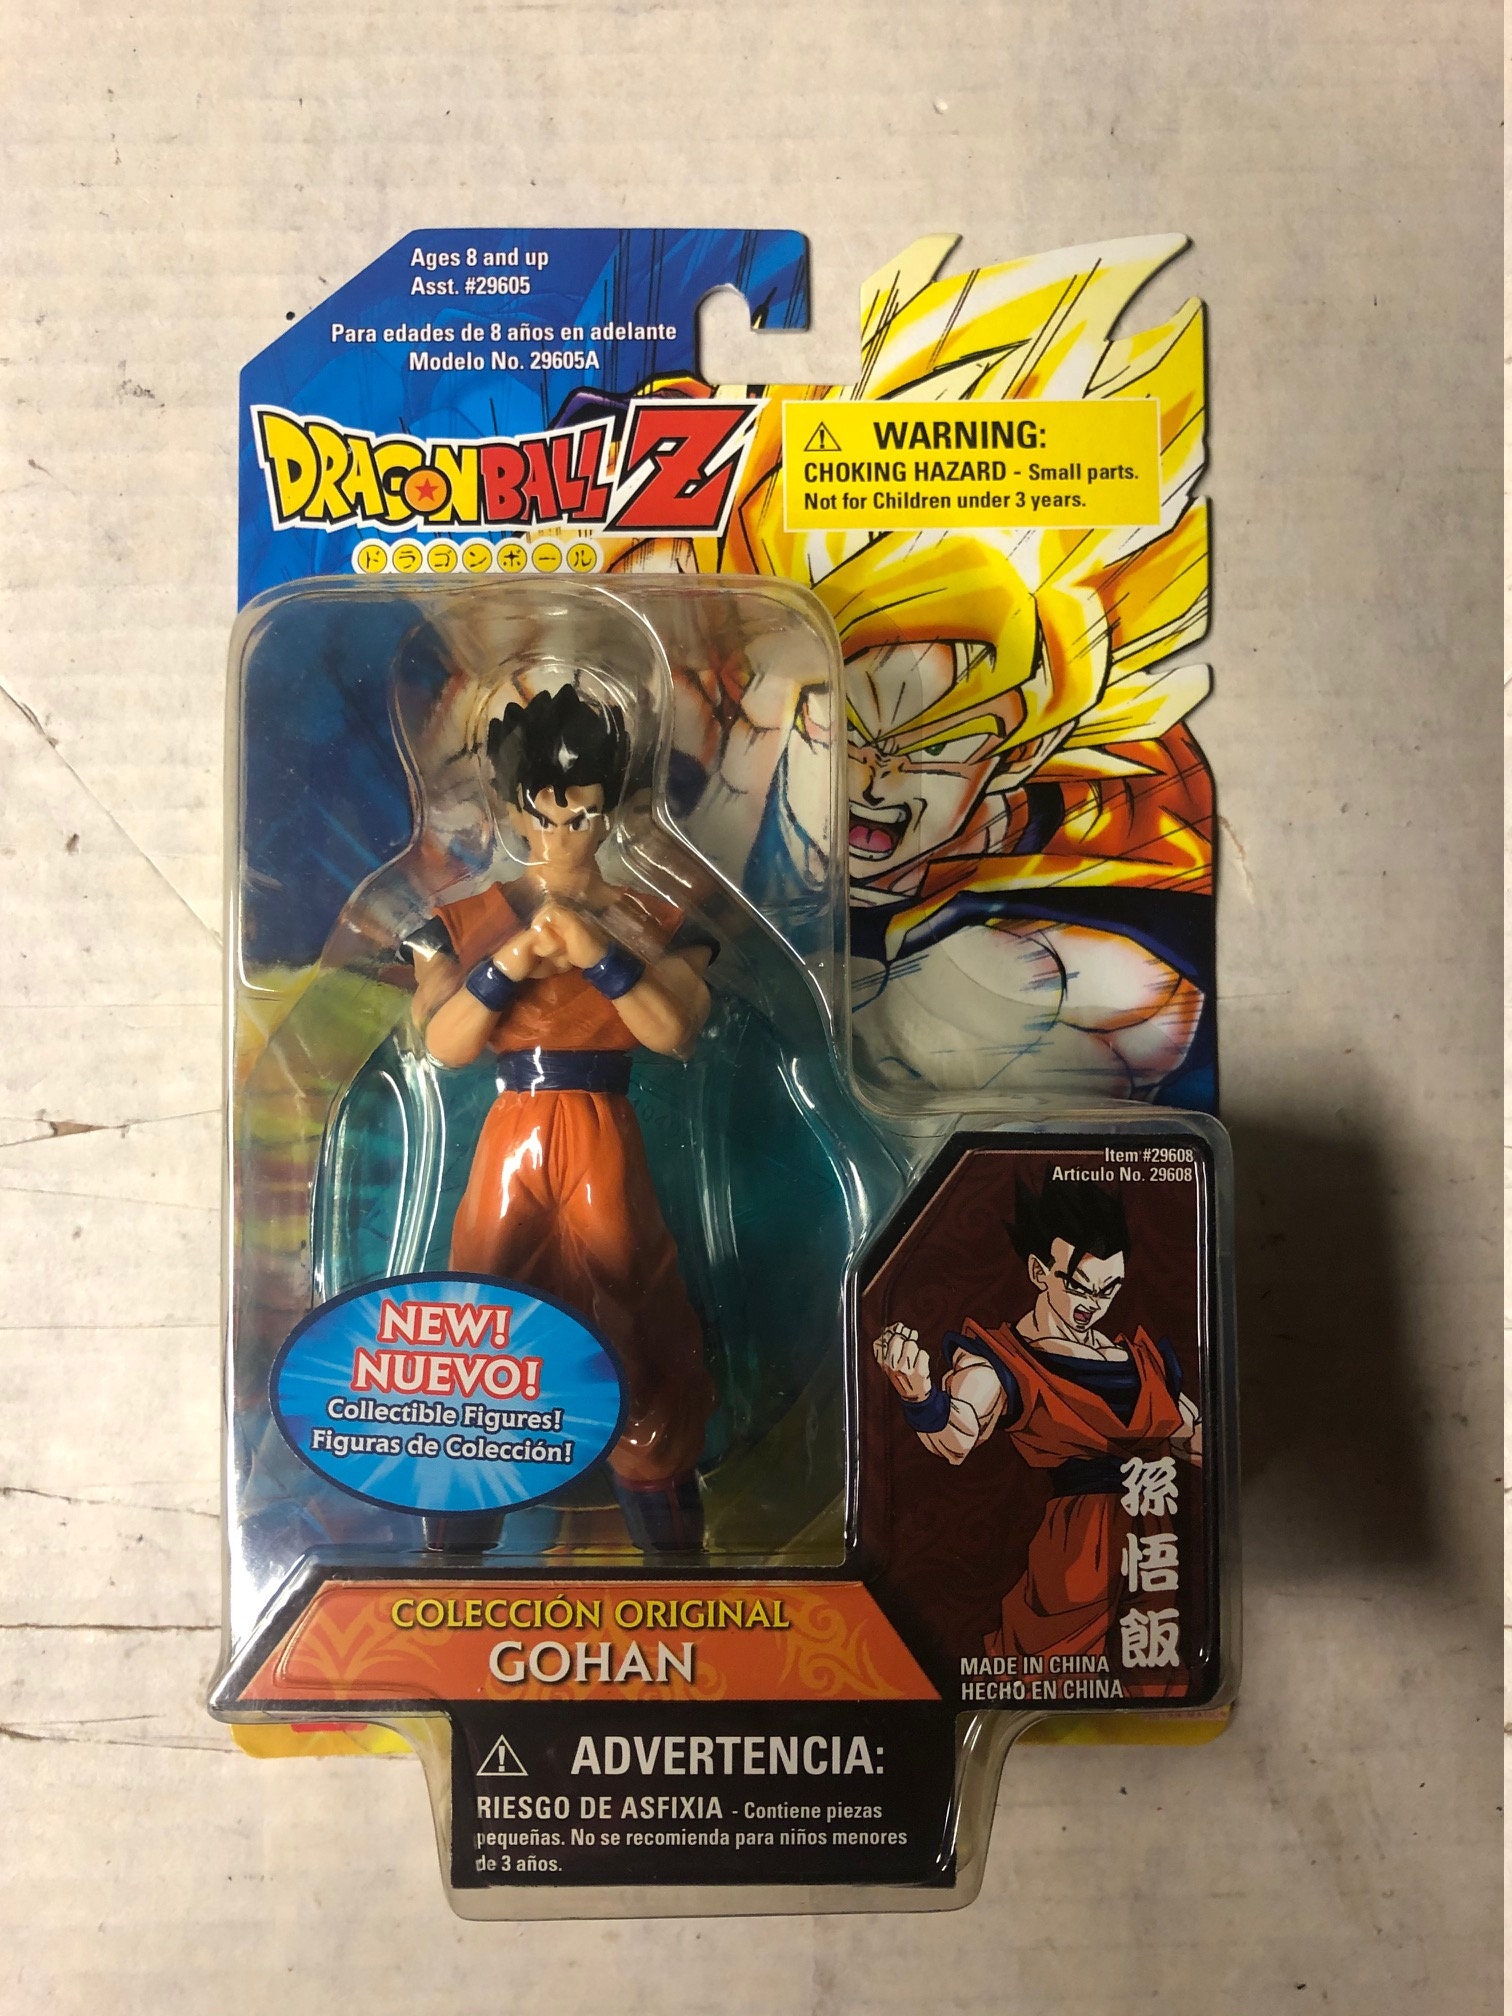 How to Make a Paper Goku Transforming! ARTICULATED AND RECYCLABLE